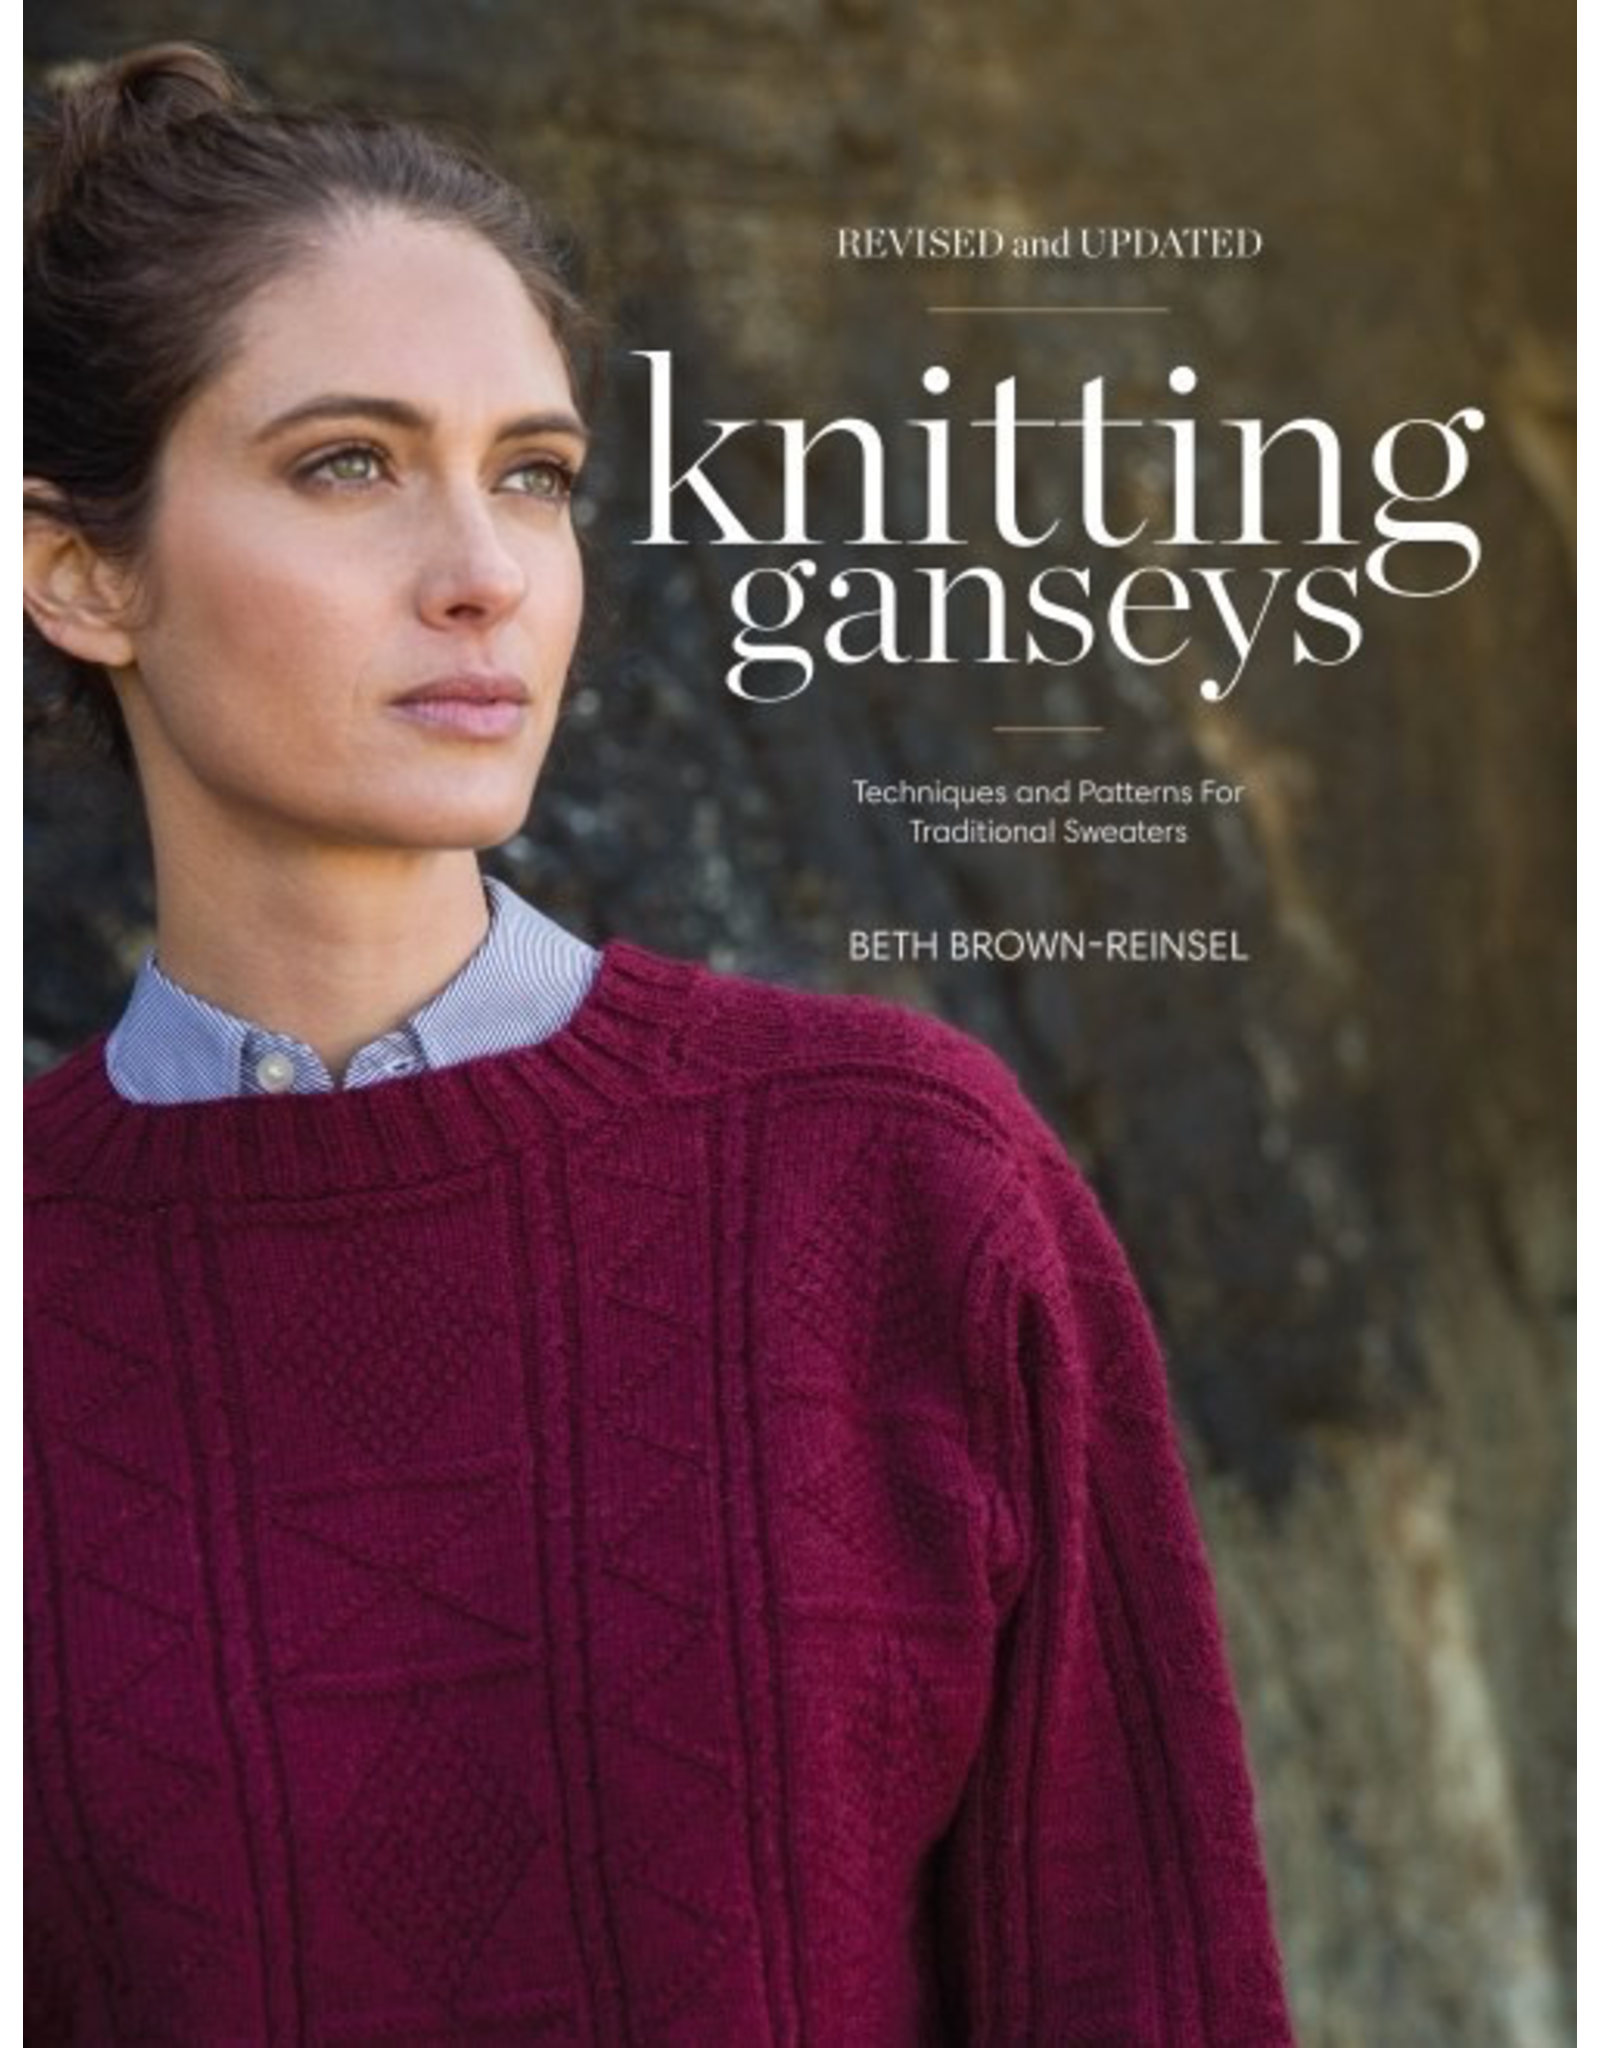 Interweave Knitting Ganseys - Revised and Updated: Tehcniques and Patterns for Traditional Sweaters